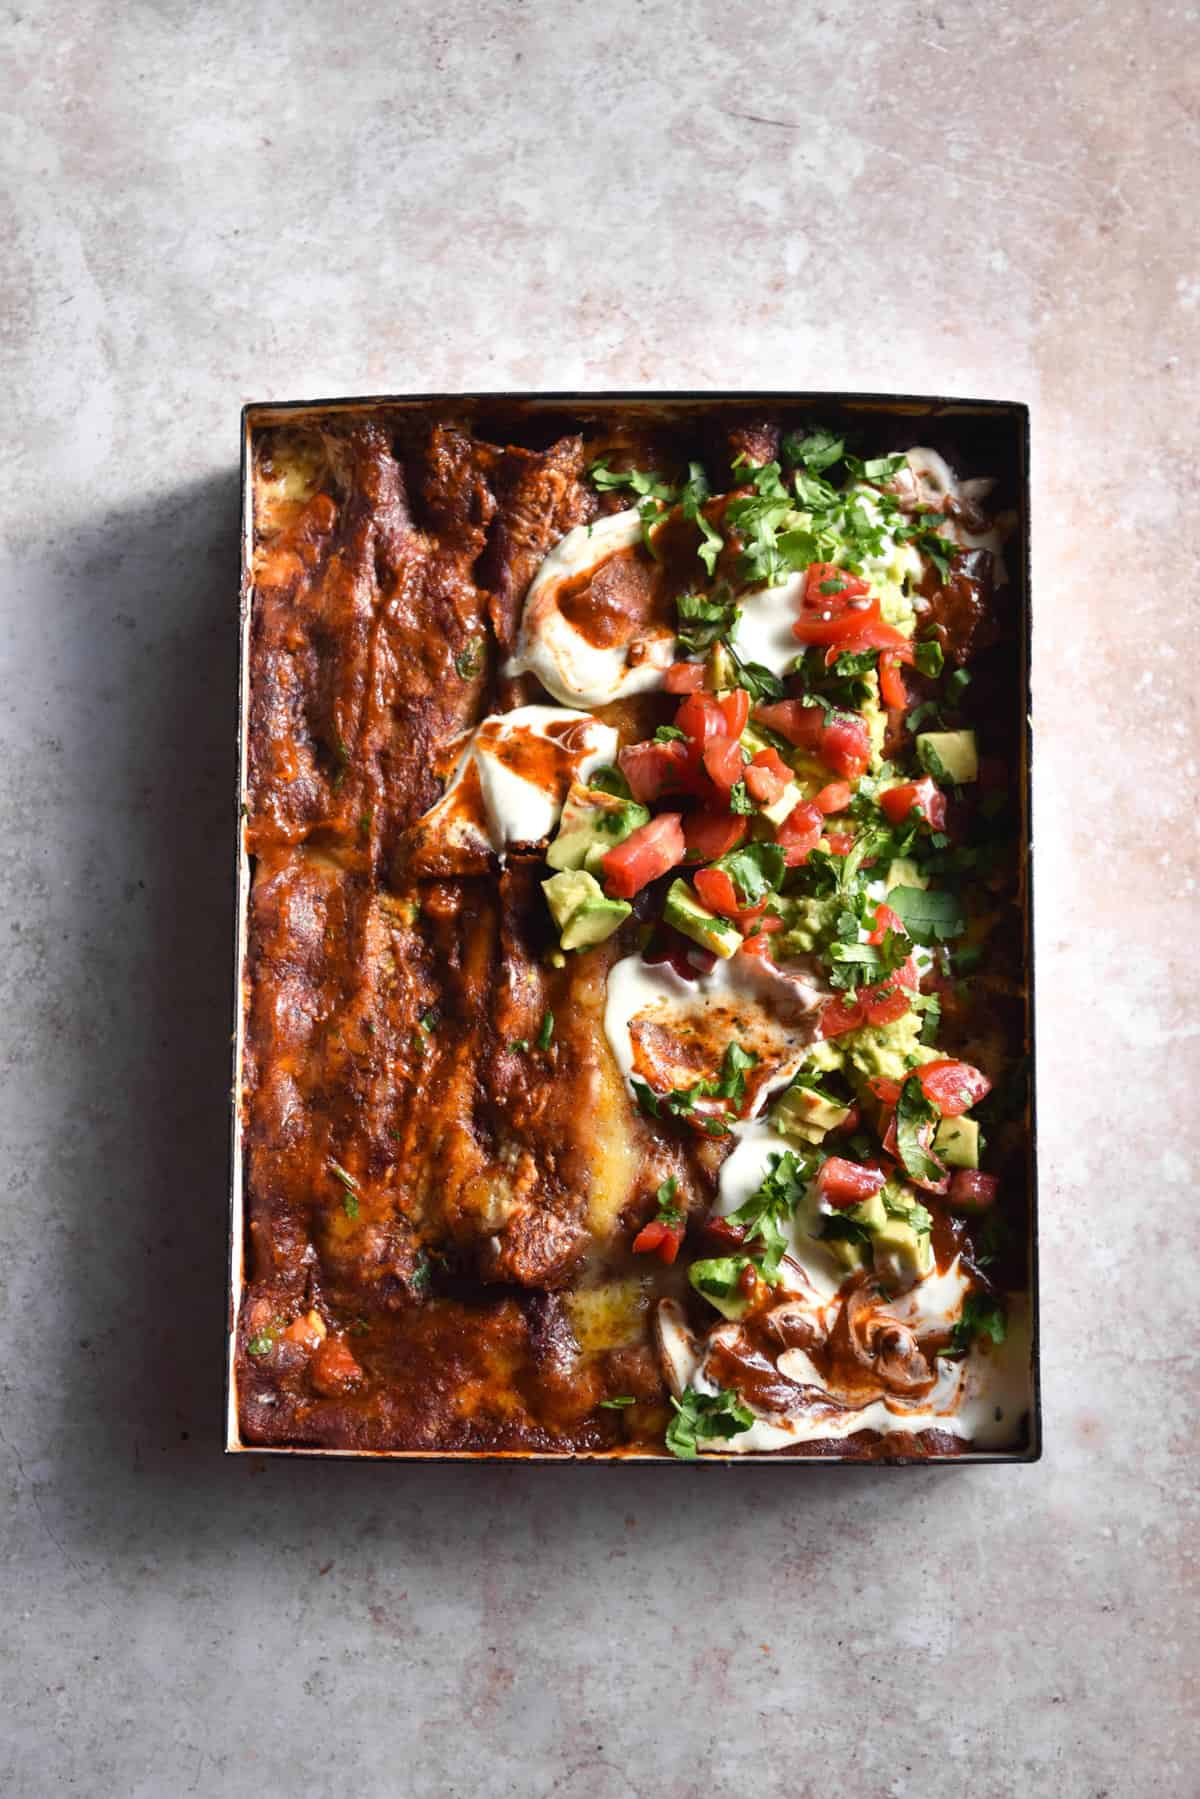 An aerial image of a white baking dish filled with vegetarian enchilada bake. Half of the bake is covered in an avocado and tomato salsa. The baking dish sits atop a light pink backdrop